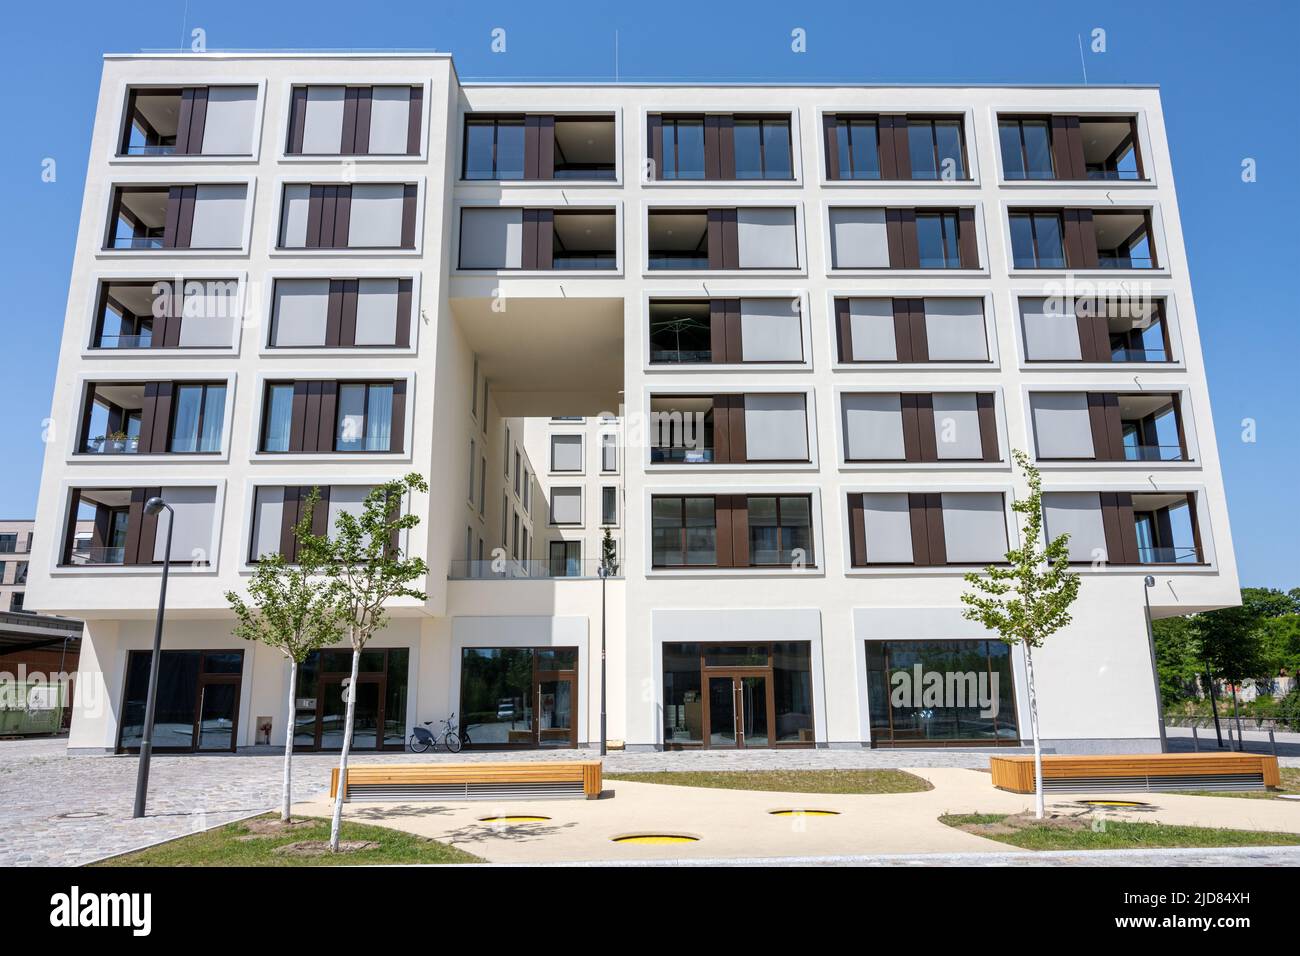 Modern apartment building in a housing development area in Berlin, Germany Stock Photo